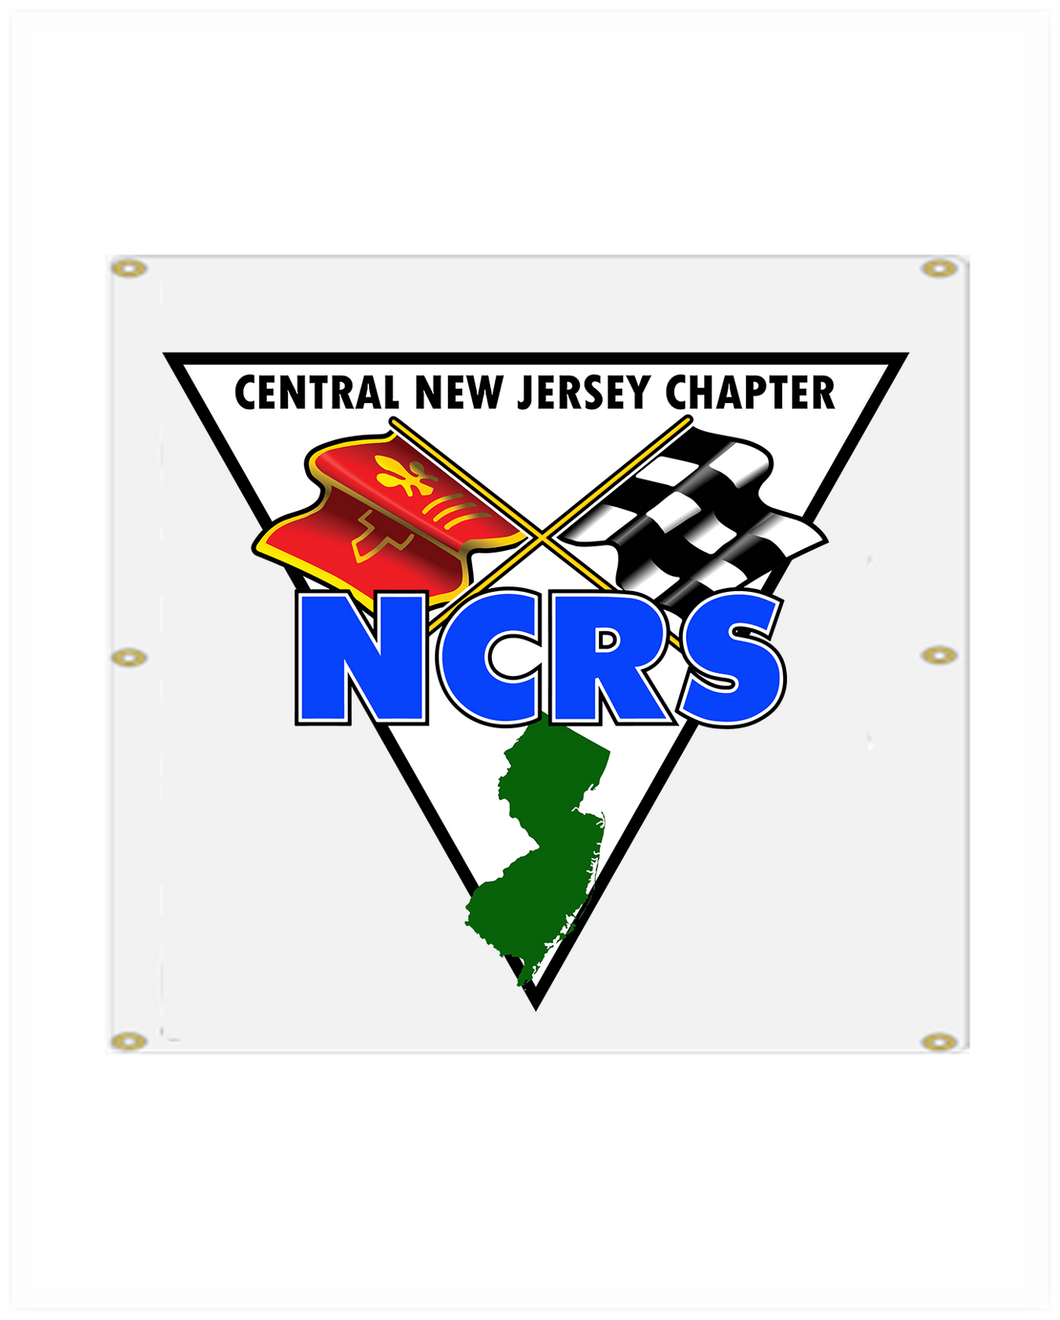 NCRS CENTRAL NEW JERSEY CHAPTER Garage Banner